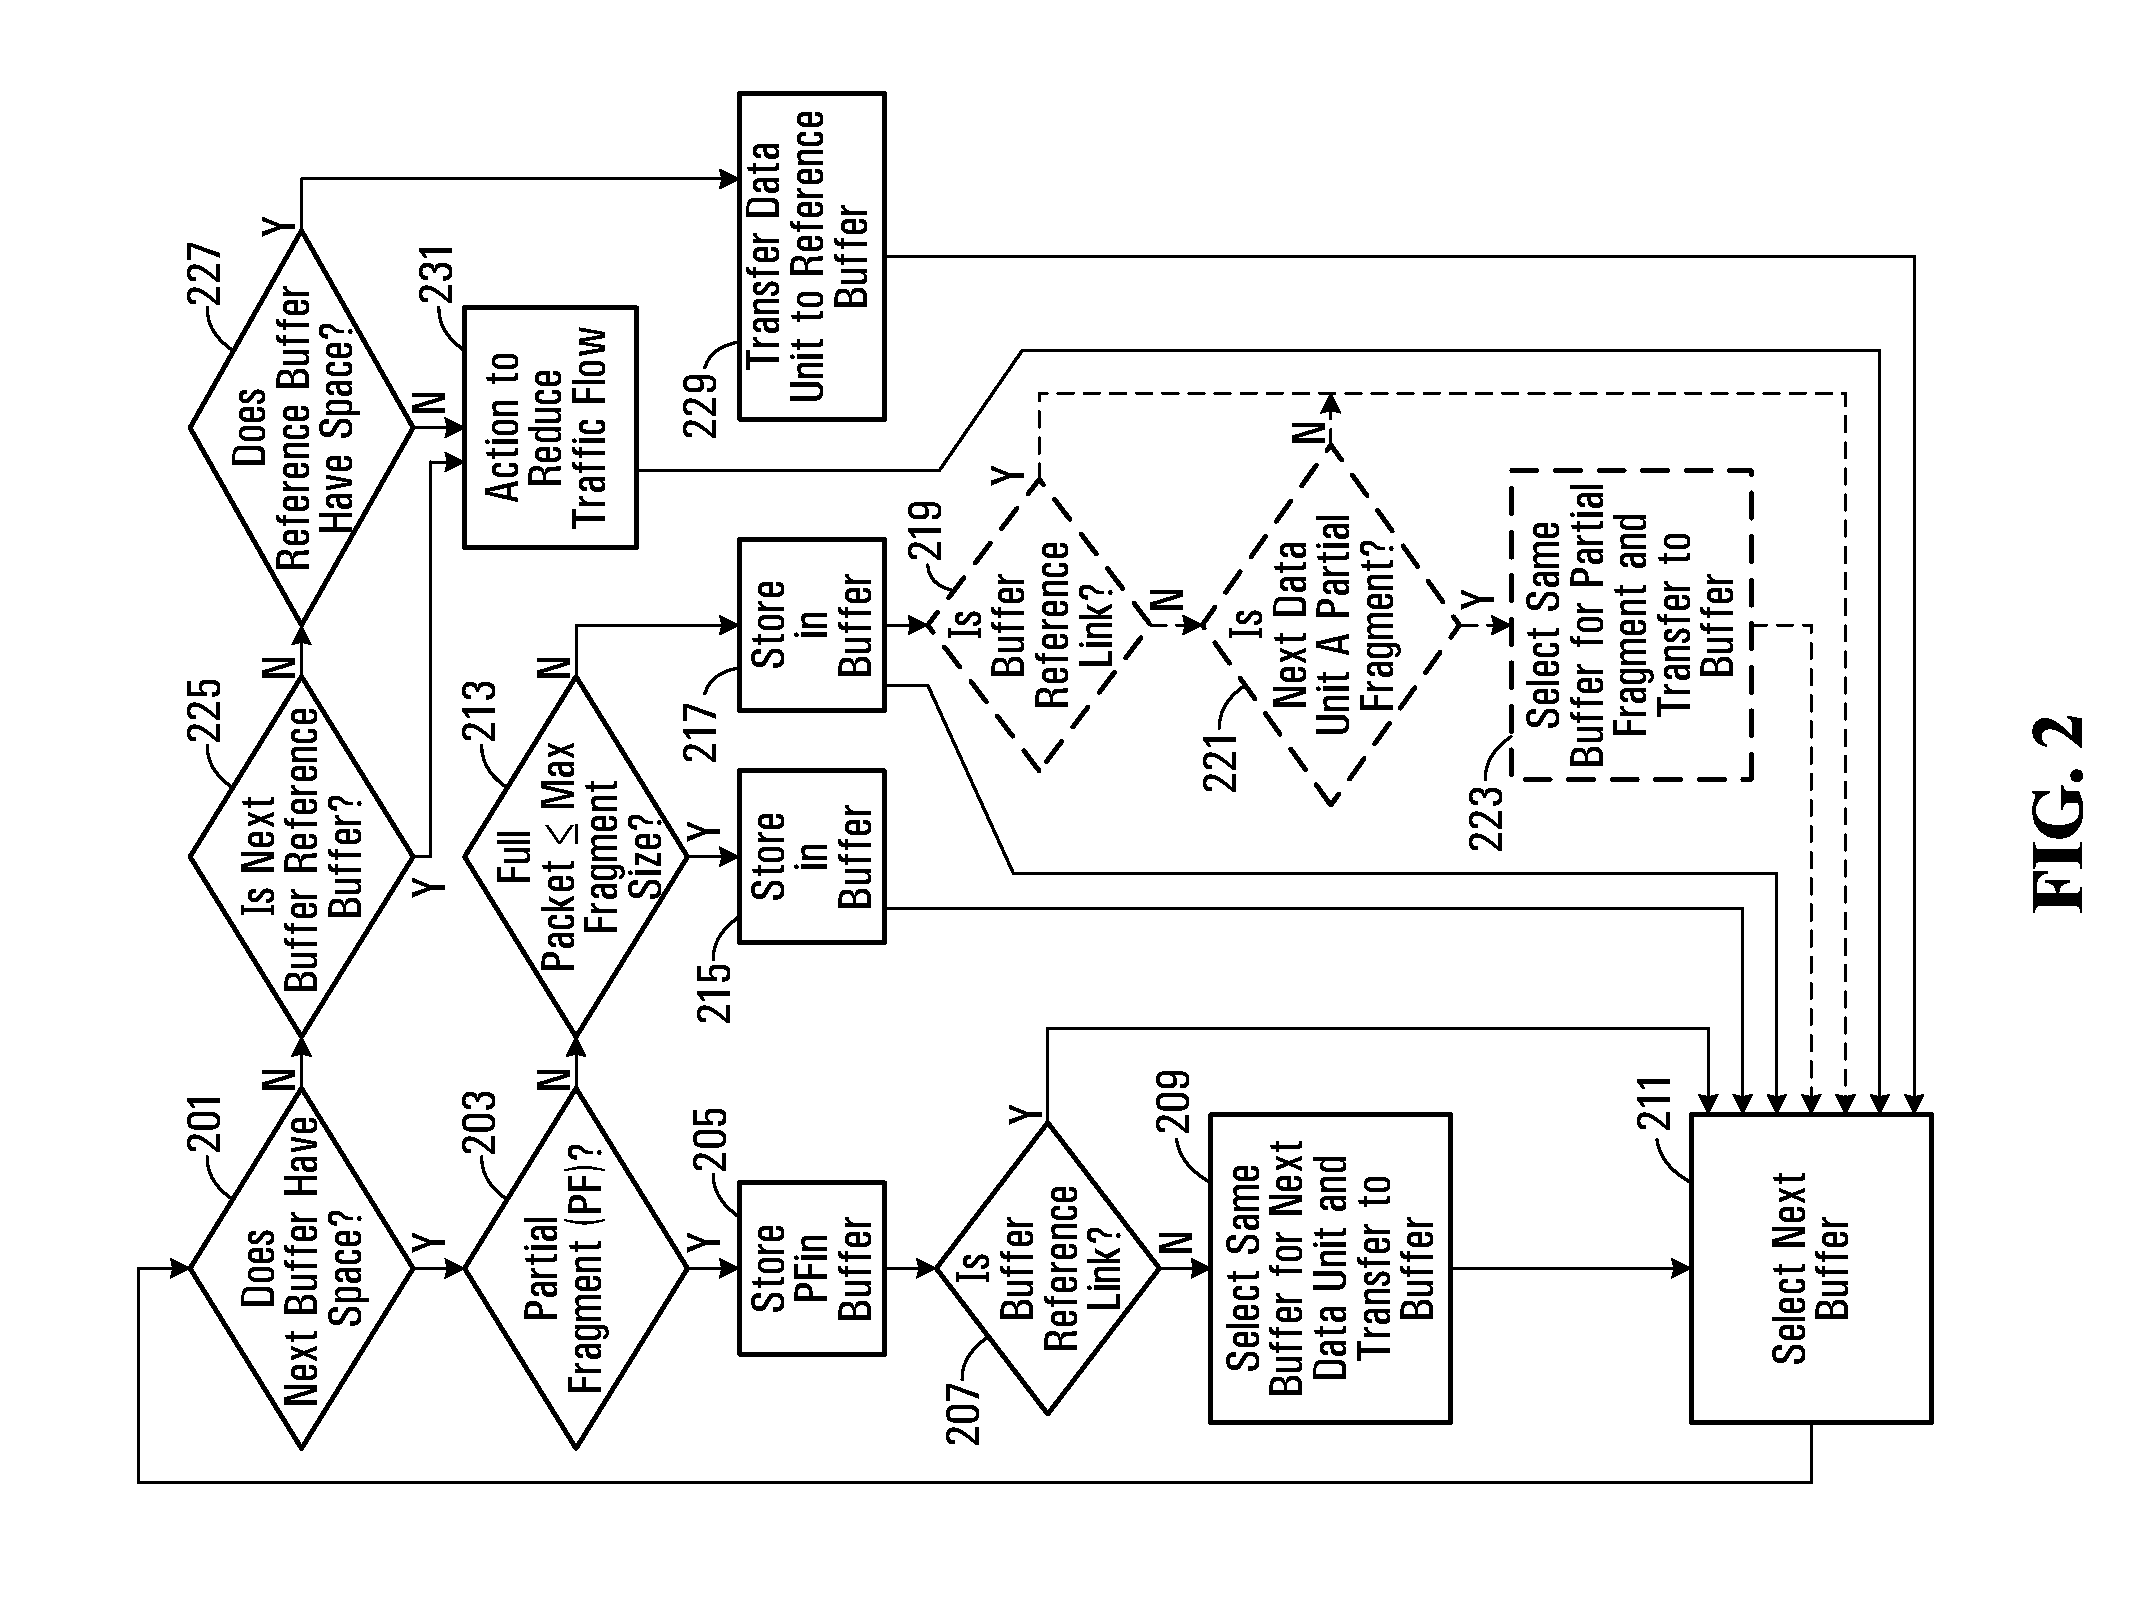 Apparatus and method for controlling the transfer of communication traffic to multiple links of a multi-link system